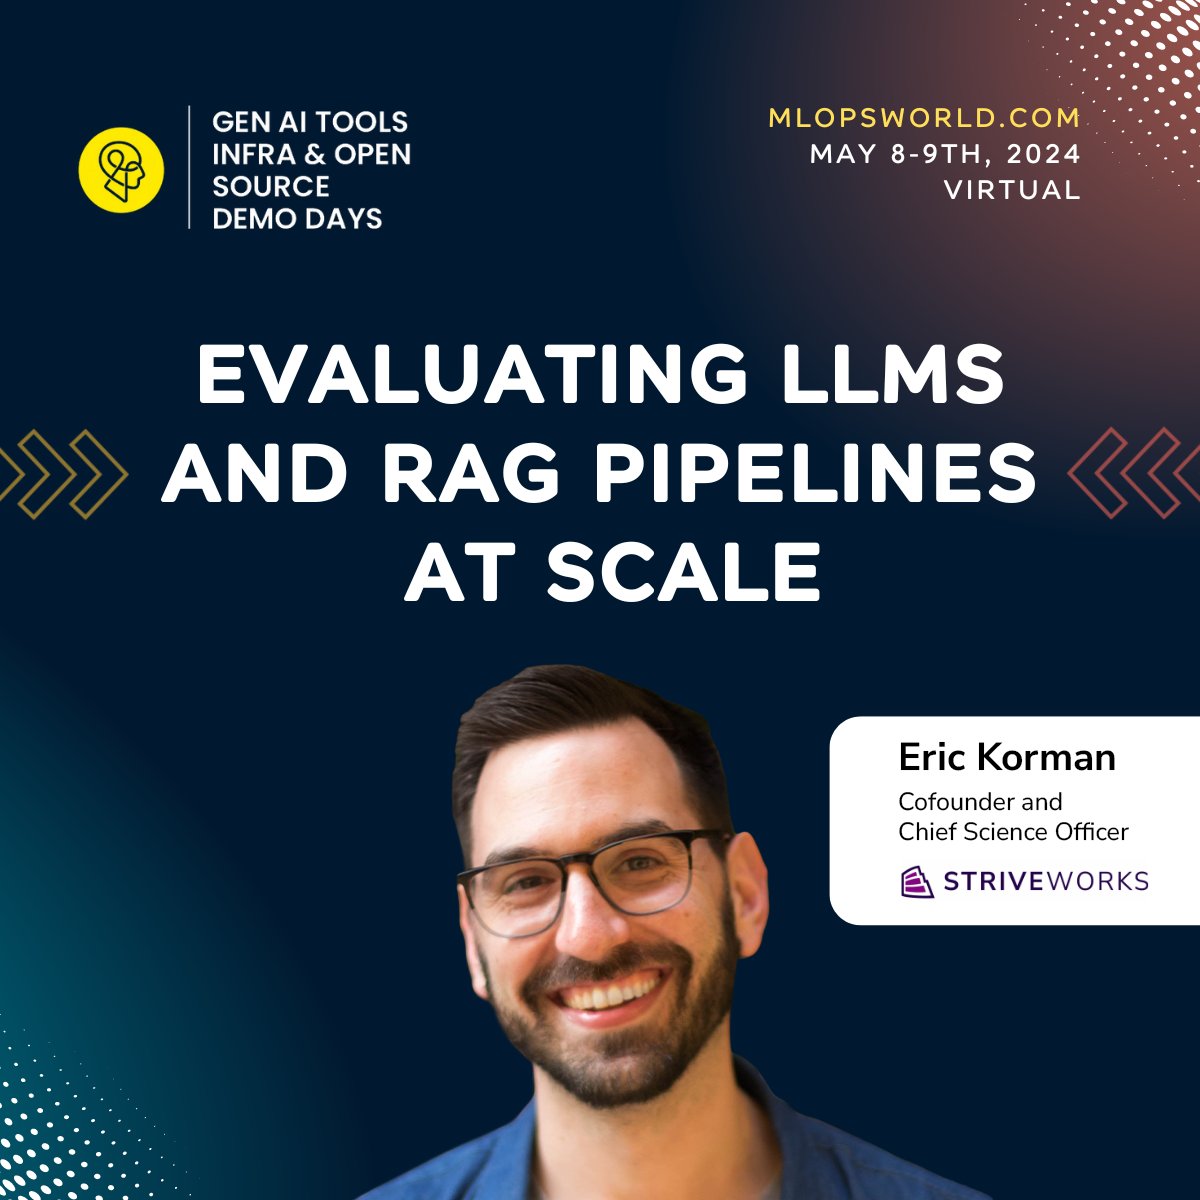 Register to hear Striveworks cofounder and CSO Eric Korman next Thursday, May 9, at the Gen AI Tools Infra & Open Source Demo Days. He’s discussing “Evaluating #LLMs and #RAG Pipelines at Scale.”

Registration is free. RSVP now: bit.ly/44xkAh3.

#AI #MLOps